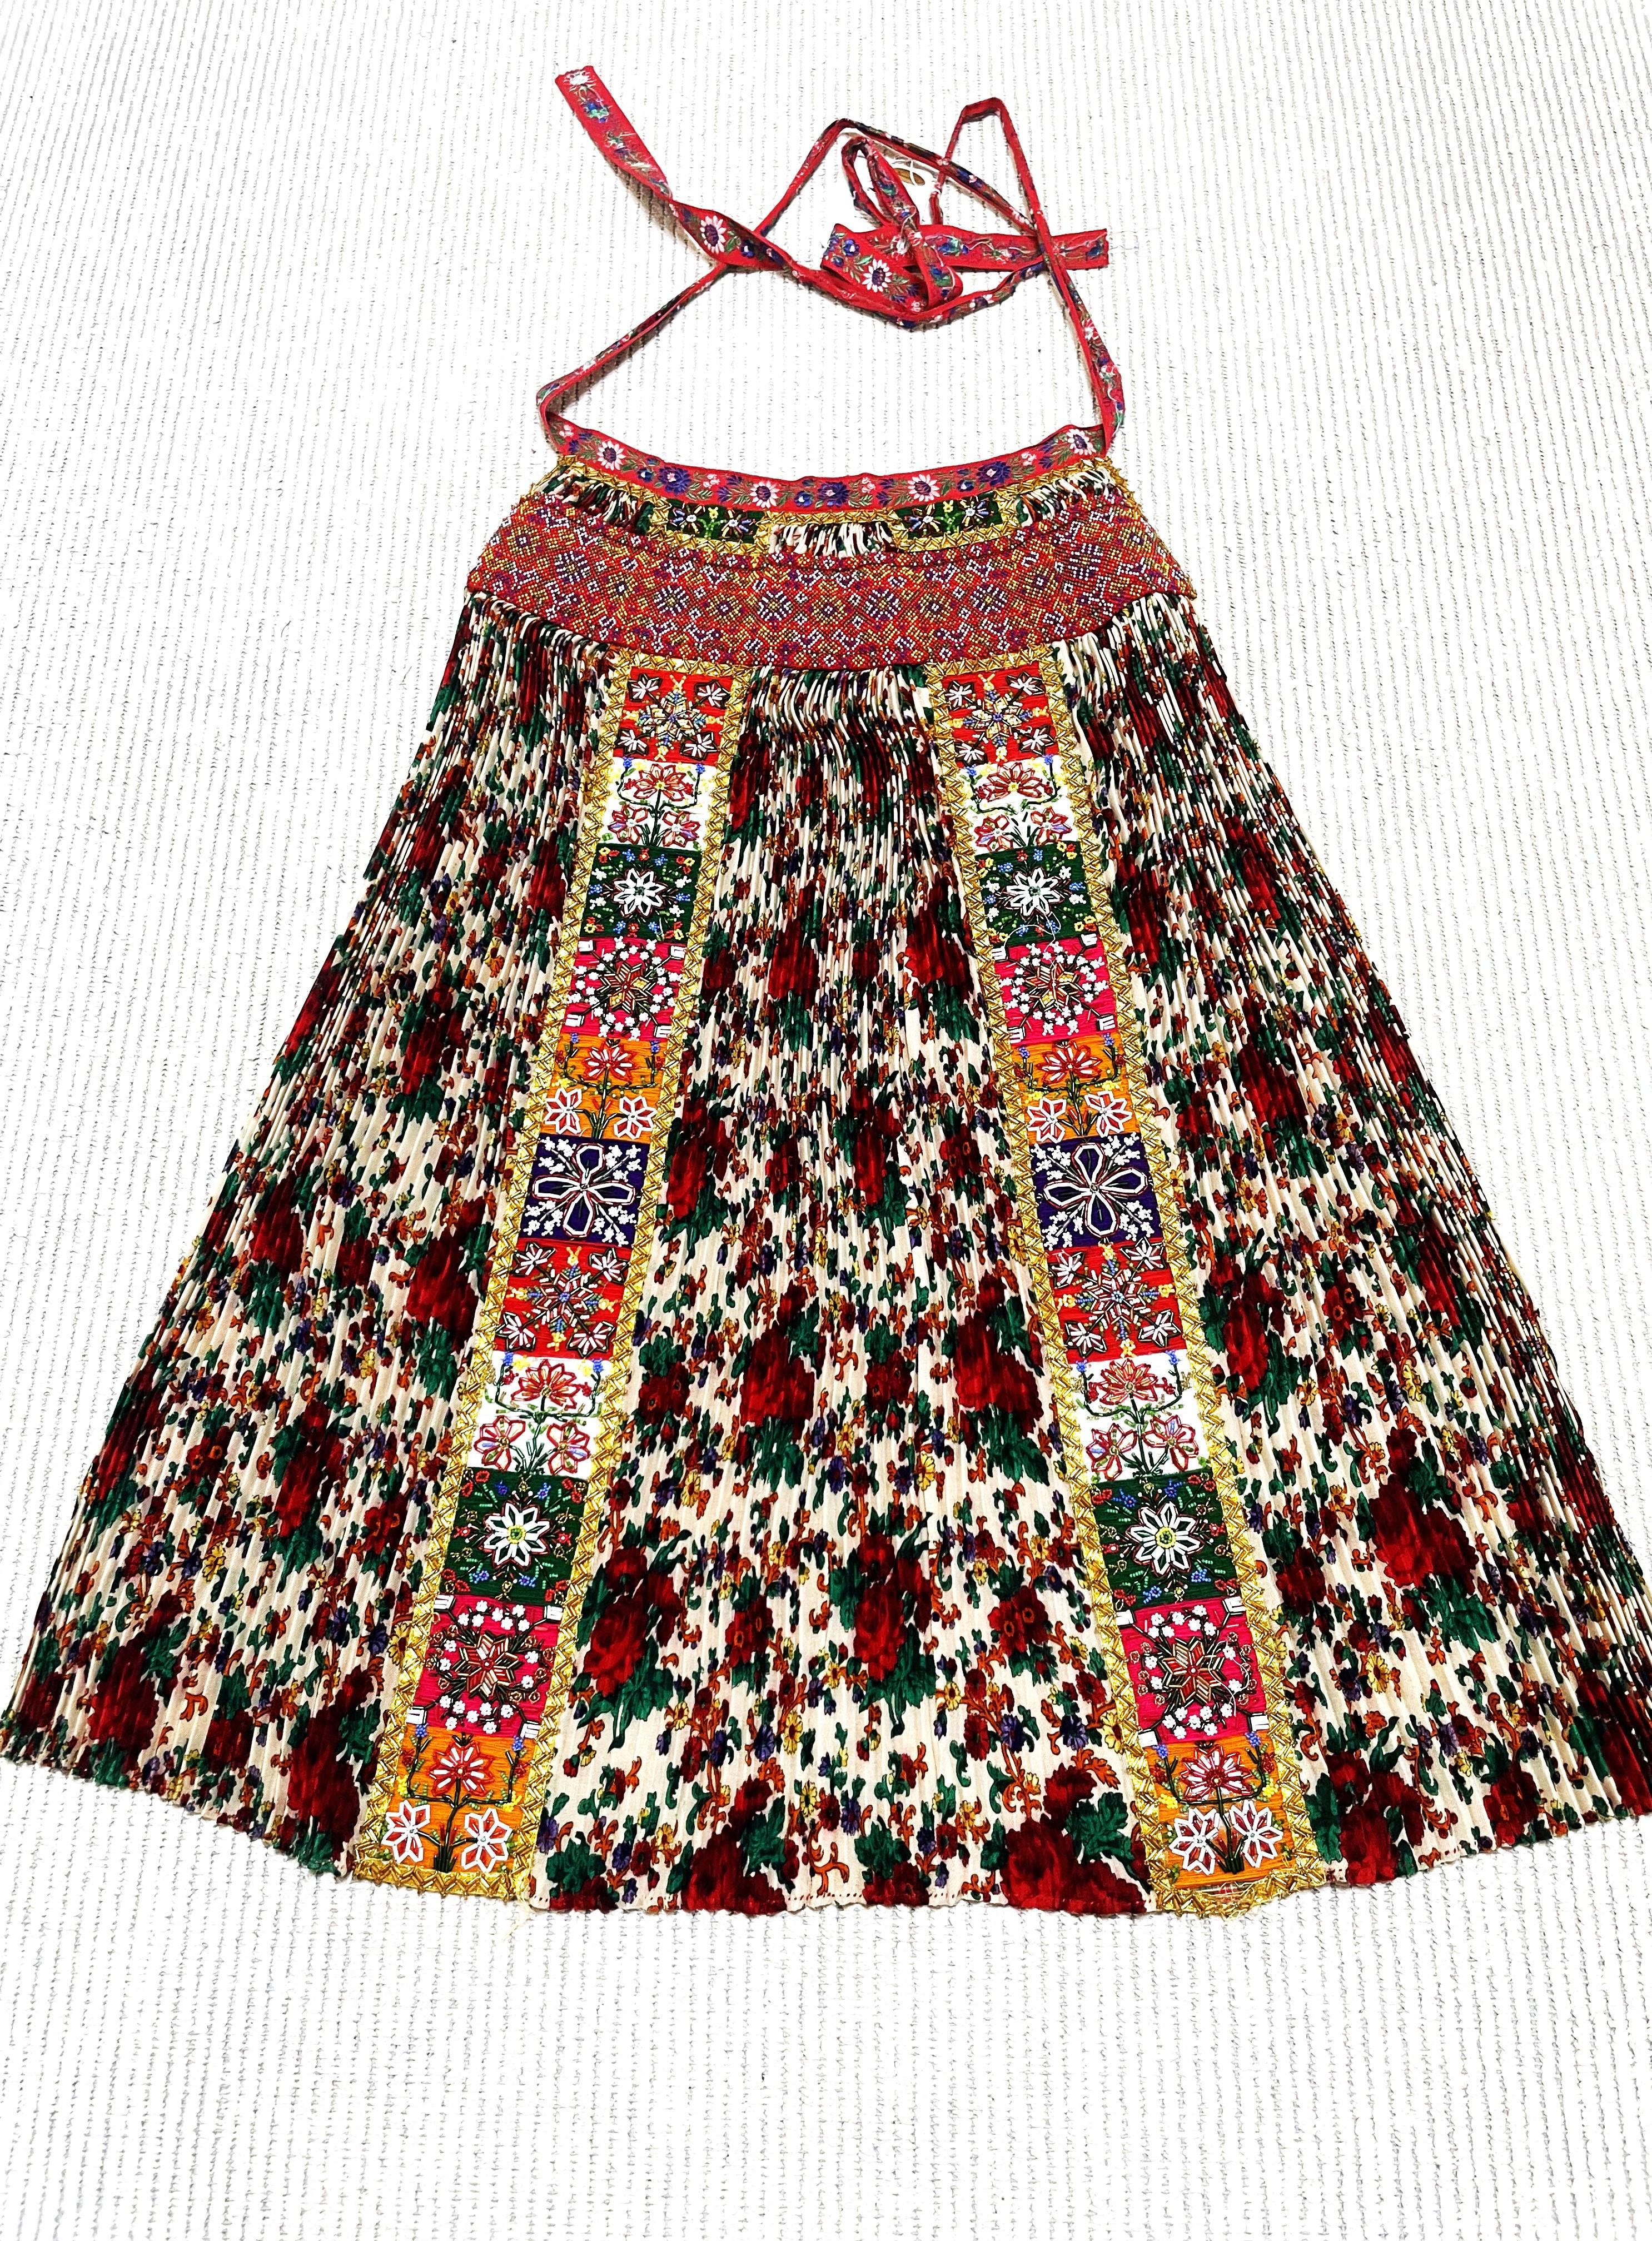  Hungarian traditional Shirt and Apron, embroiderd by hand with pealrs, 1940s For Sale 1